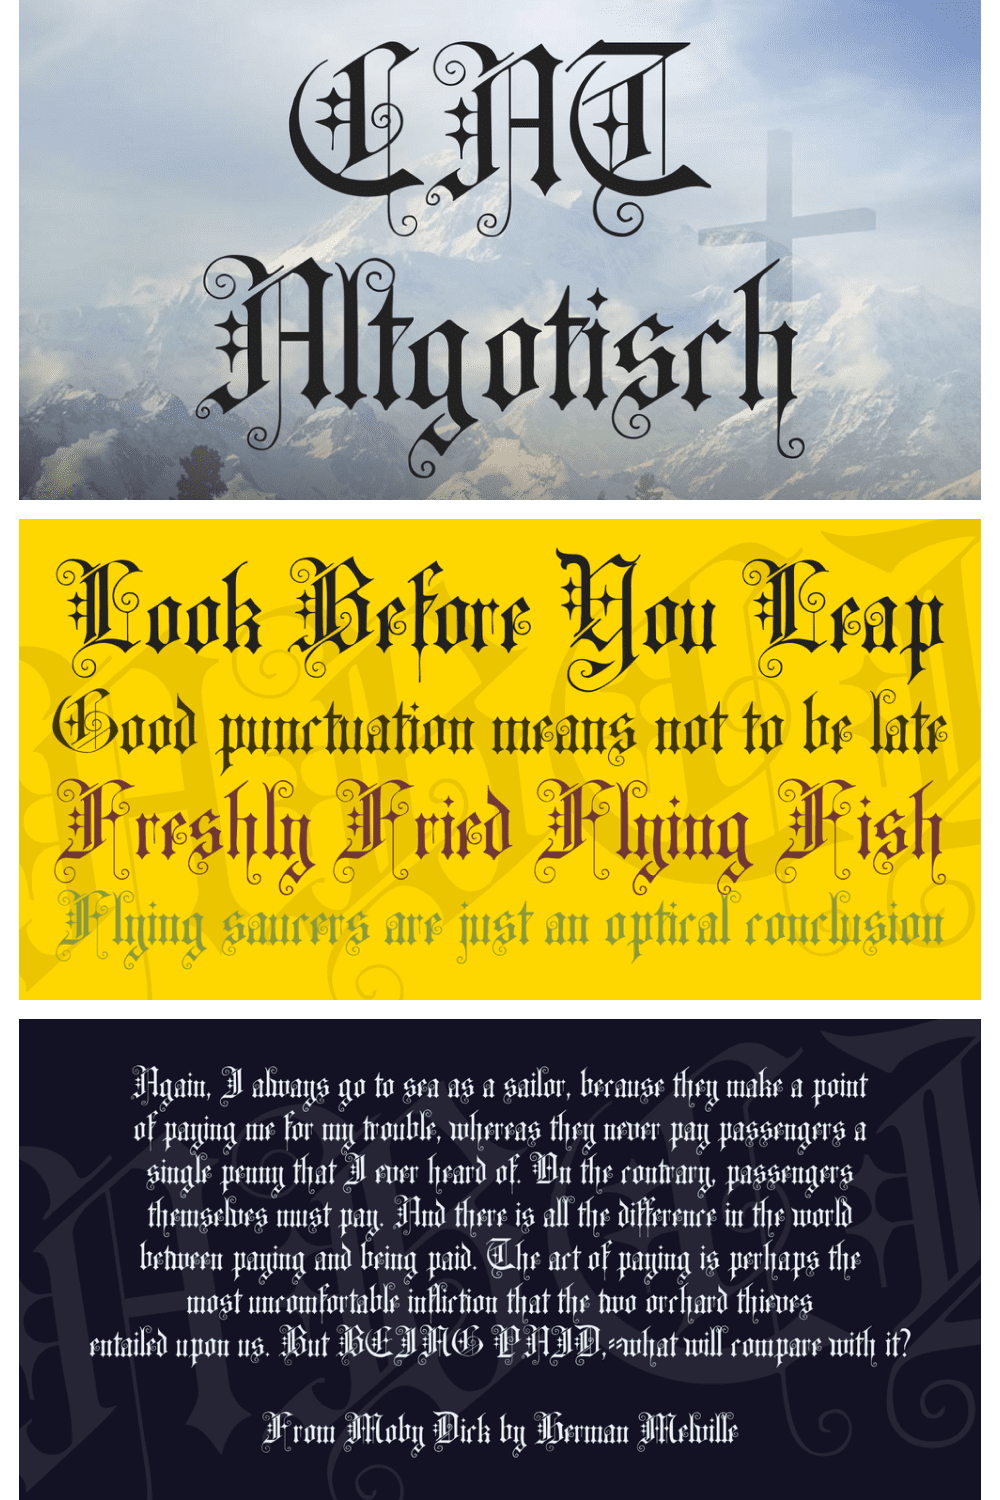 A slightly gothic typeface with creative swirls.